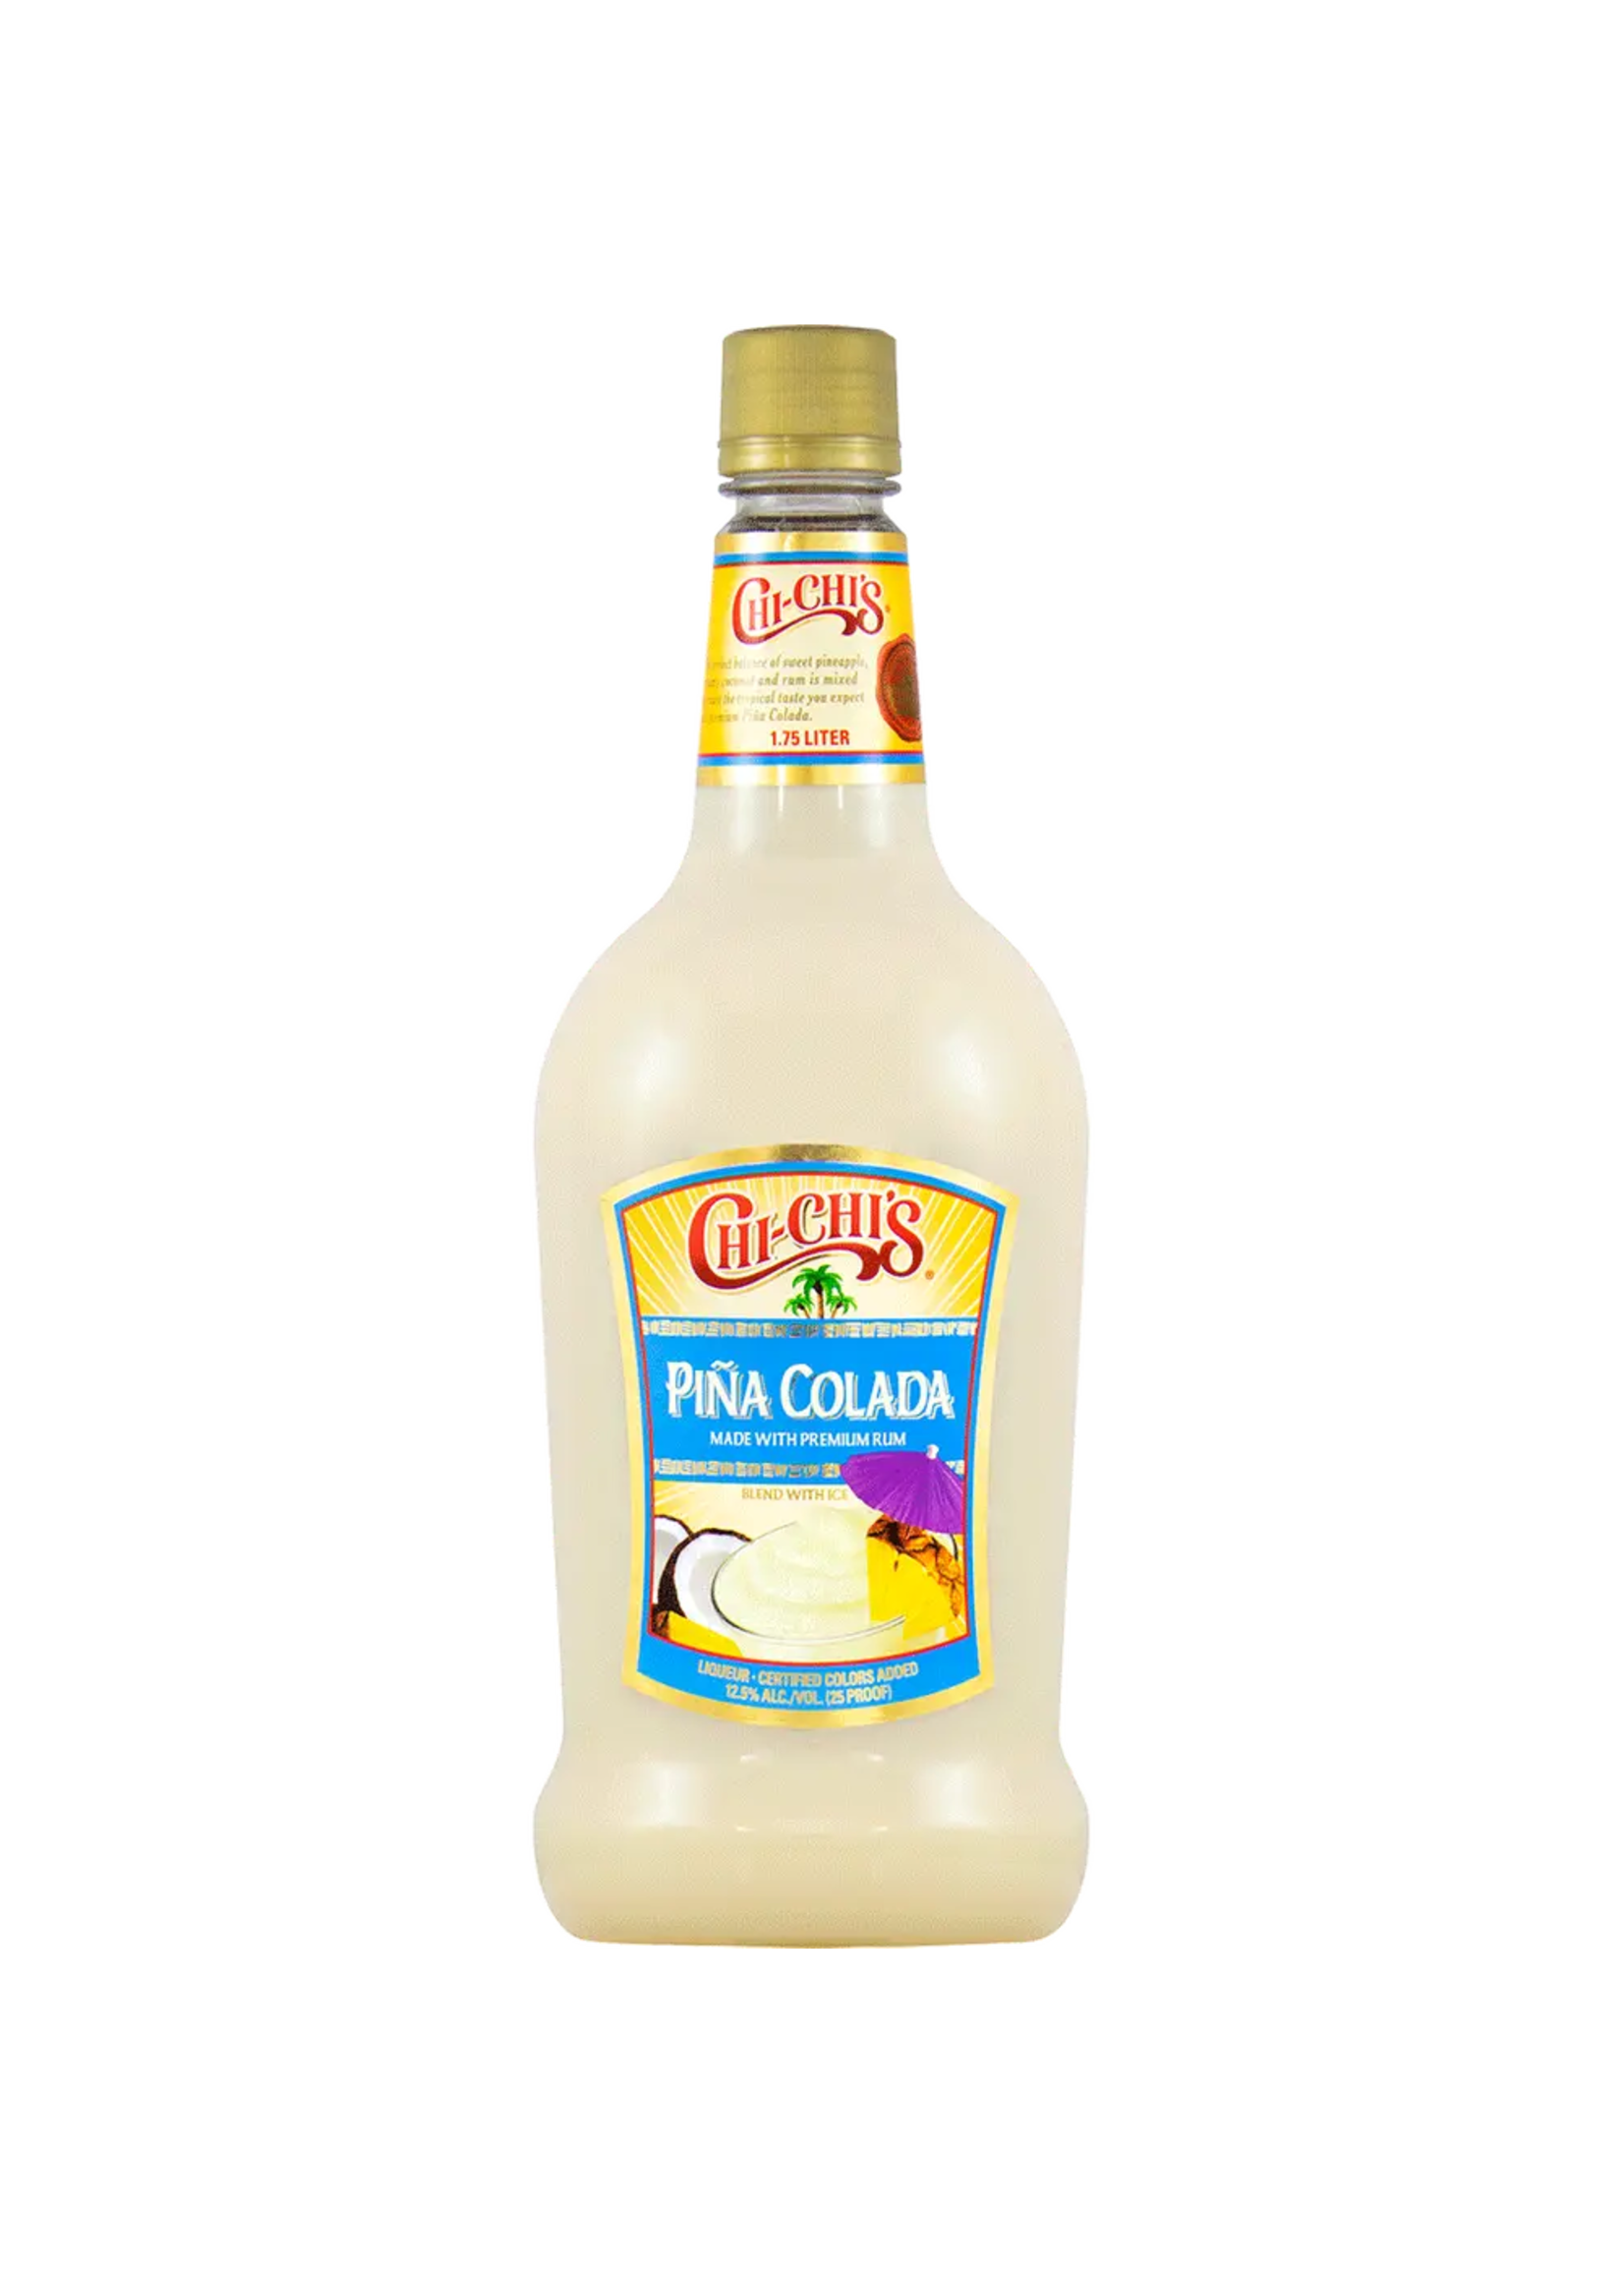 Chi Chis RTD Pina Colada 25Proof Pet 1.75 Ltr